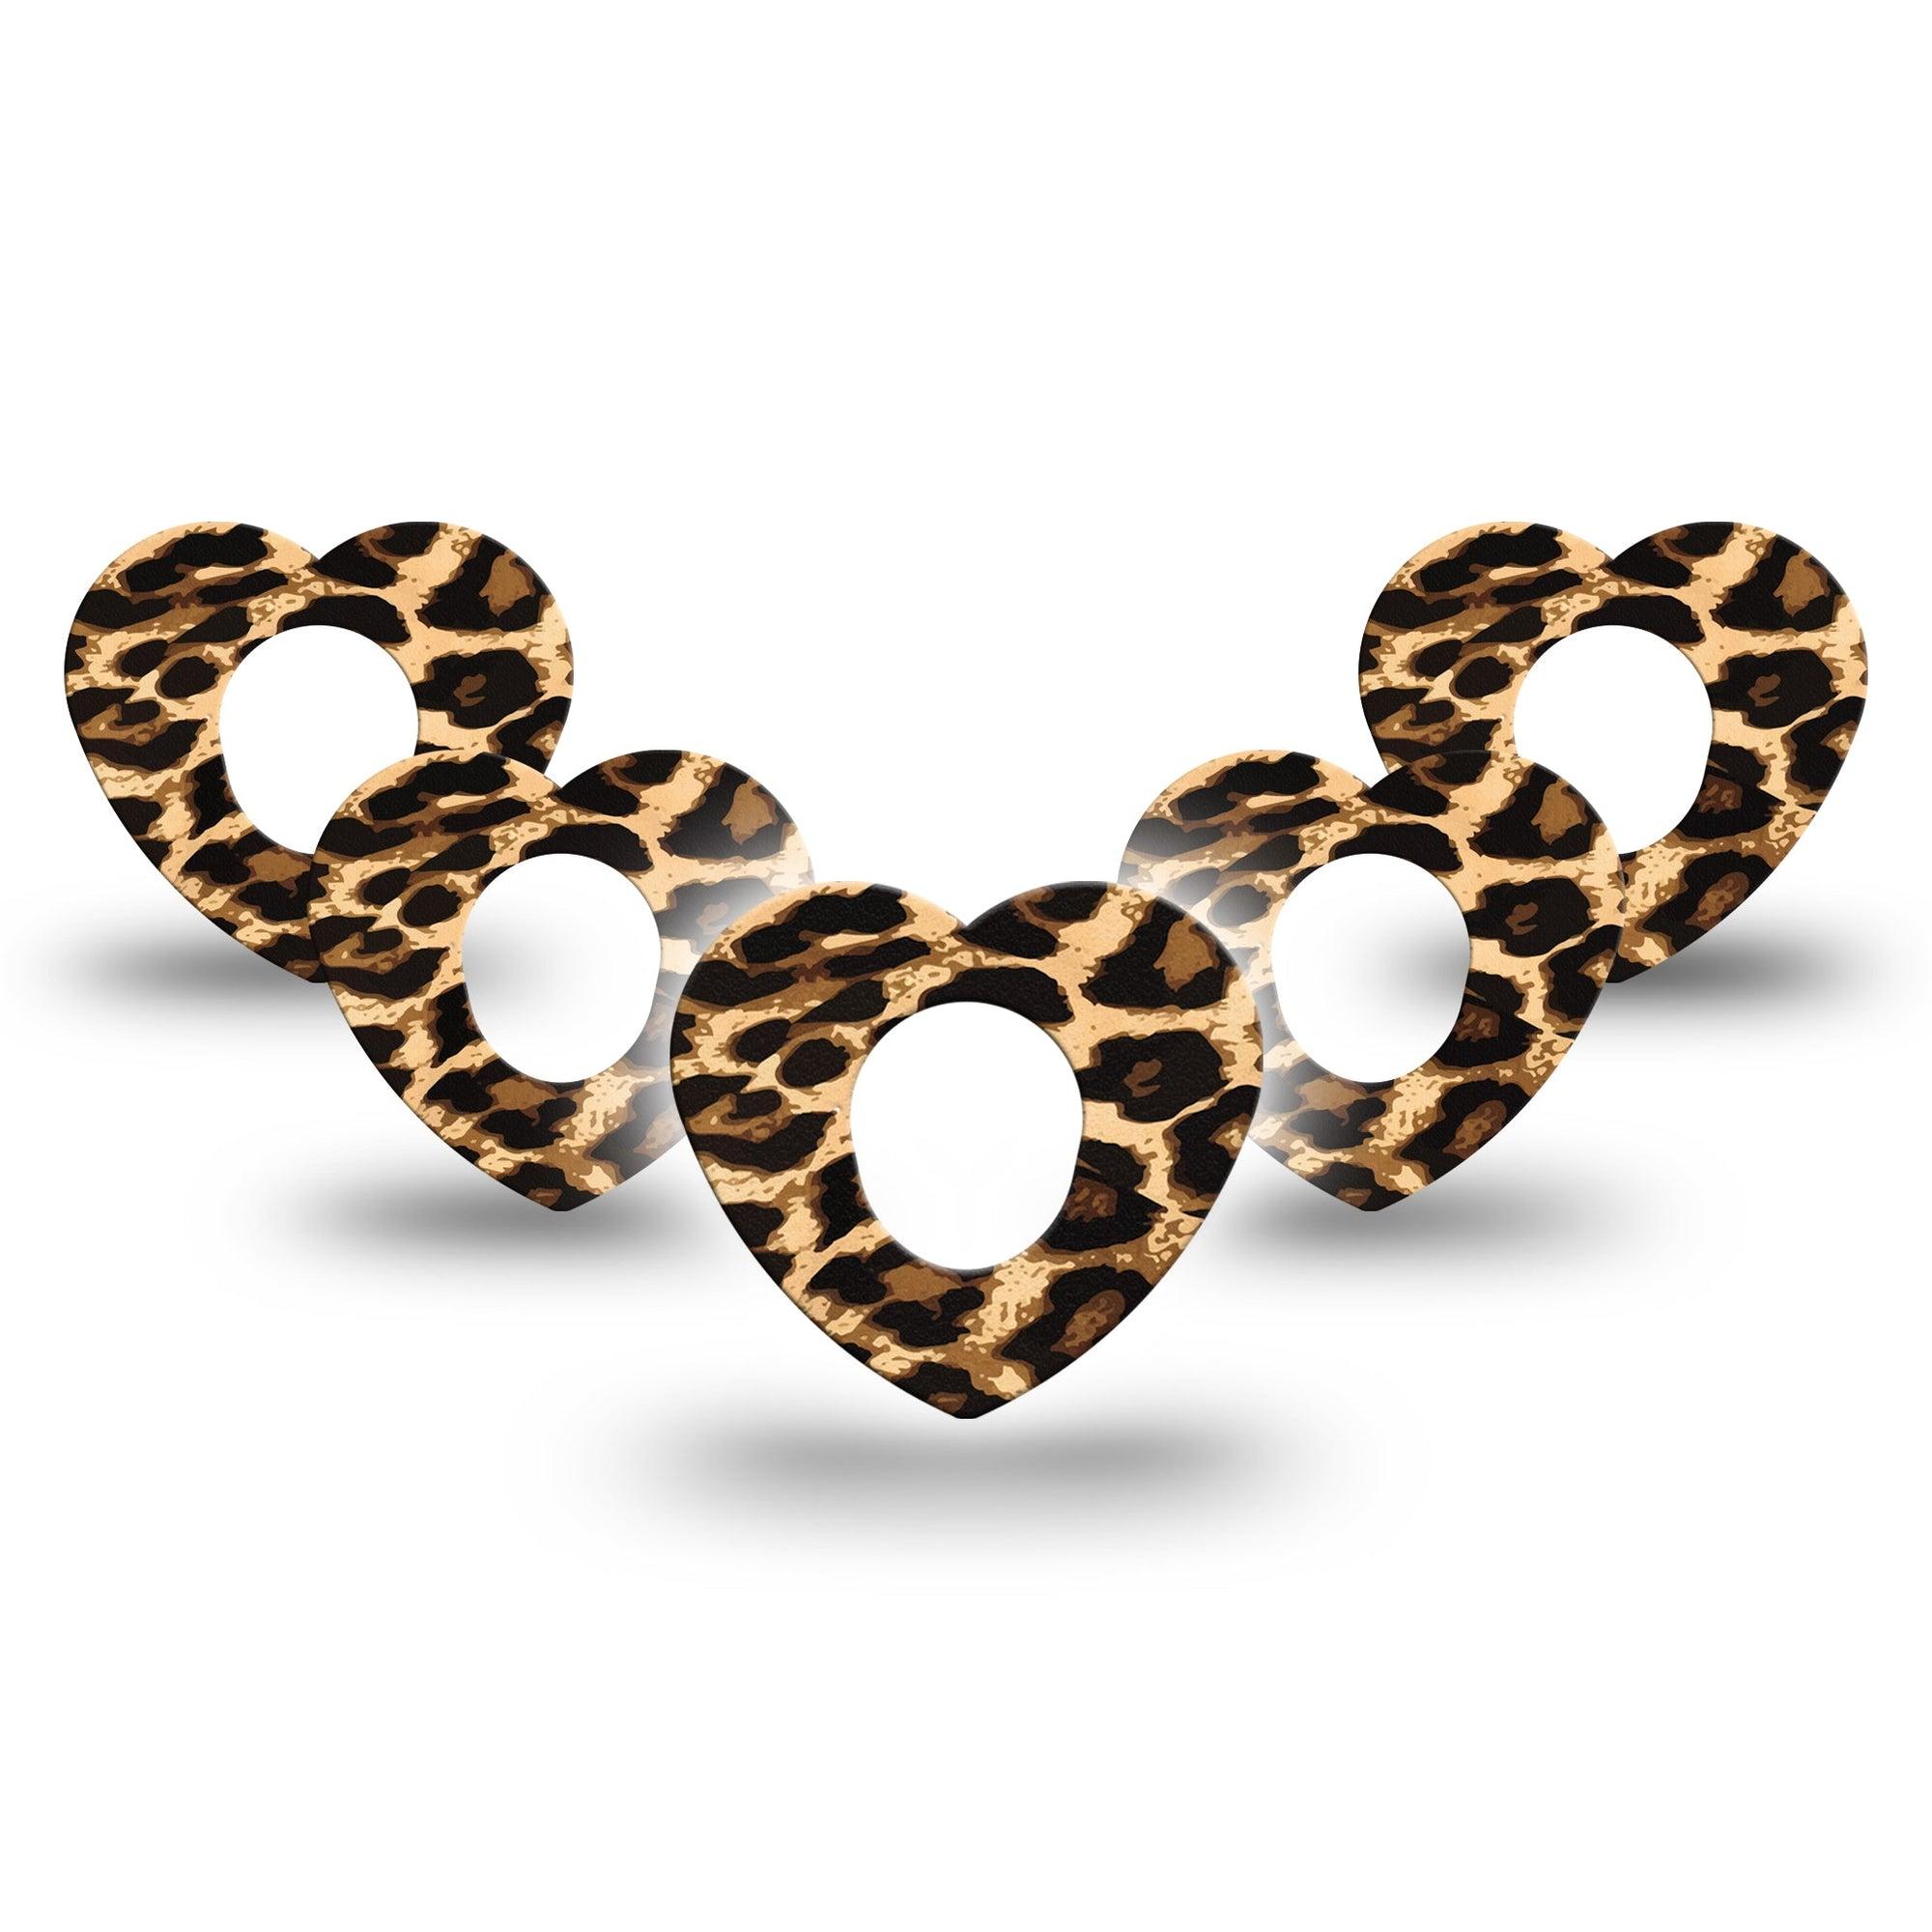 ExpressionMed Leopard Print Heart Dexcom G7 Tape, 5-Pack, Brown And Yellow Spots Themed, Adhesive Patch Design